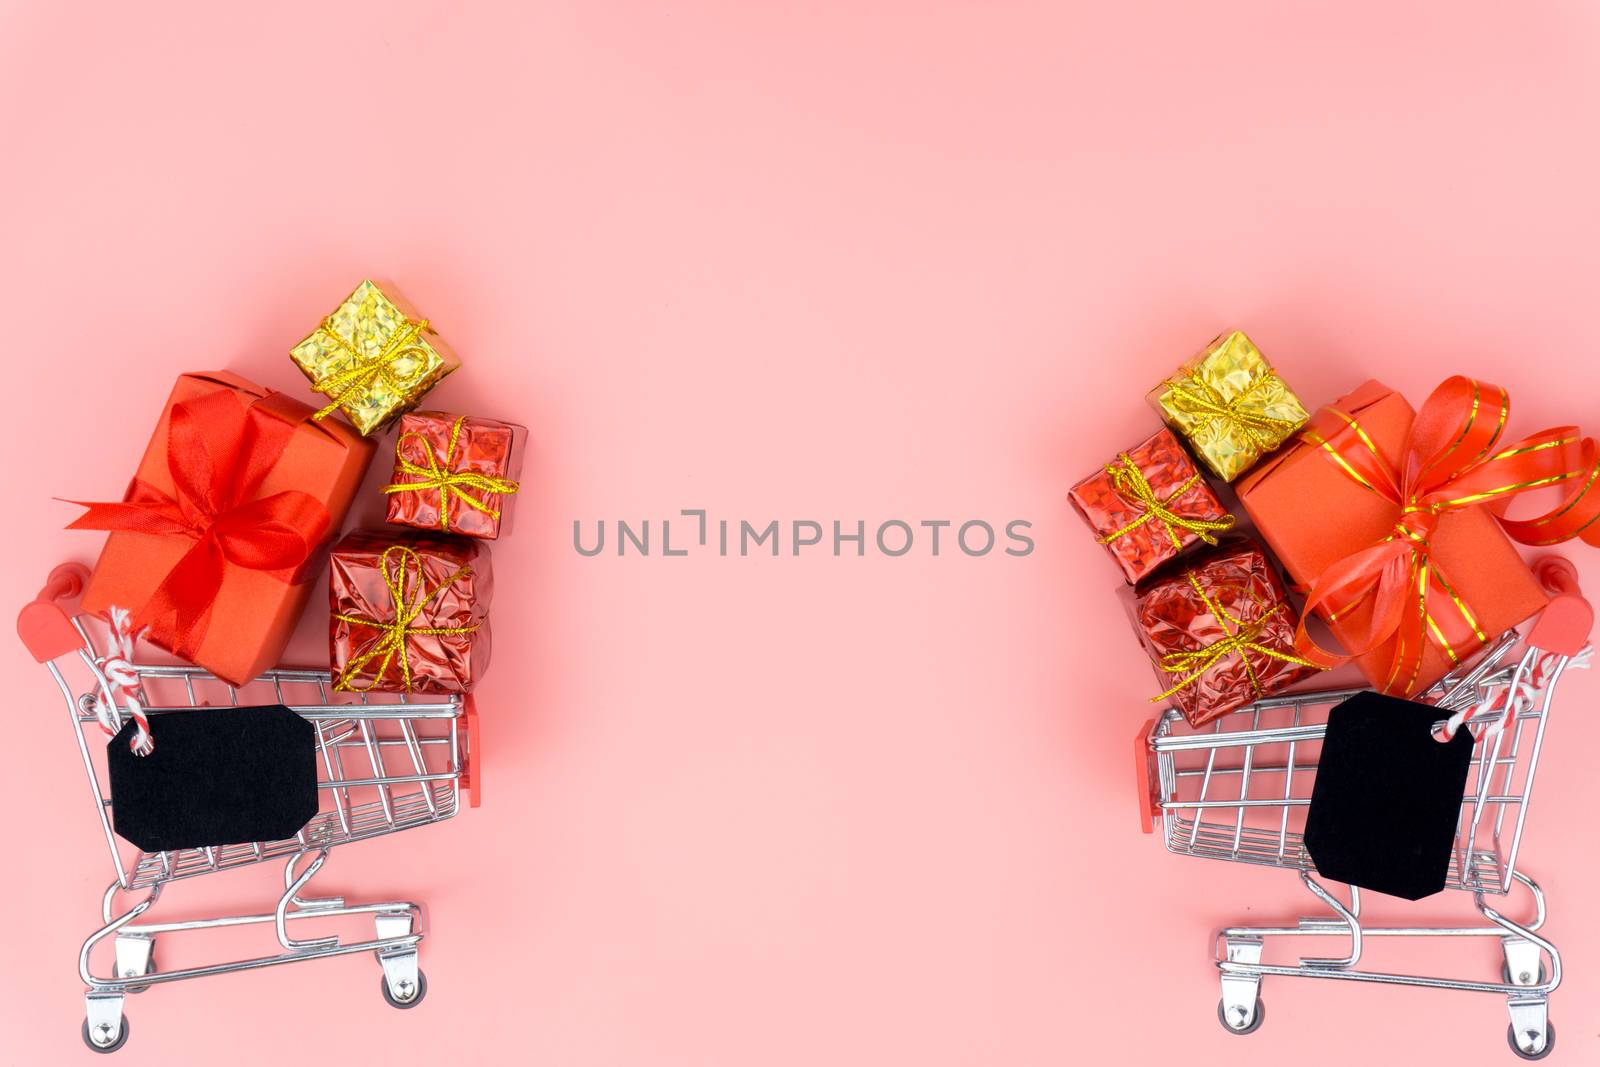 Online shopping of China, The shopping cart and Christmas boxes with red ribbon on a pink background with copy space for text. 11.11 single's day sale concept